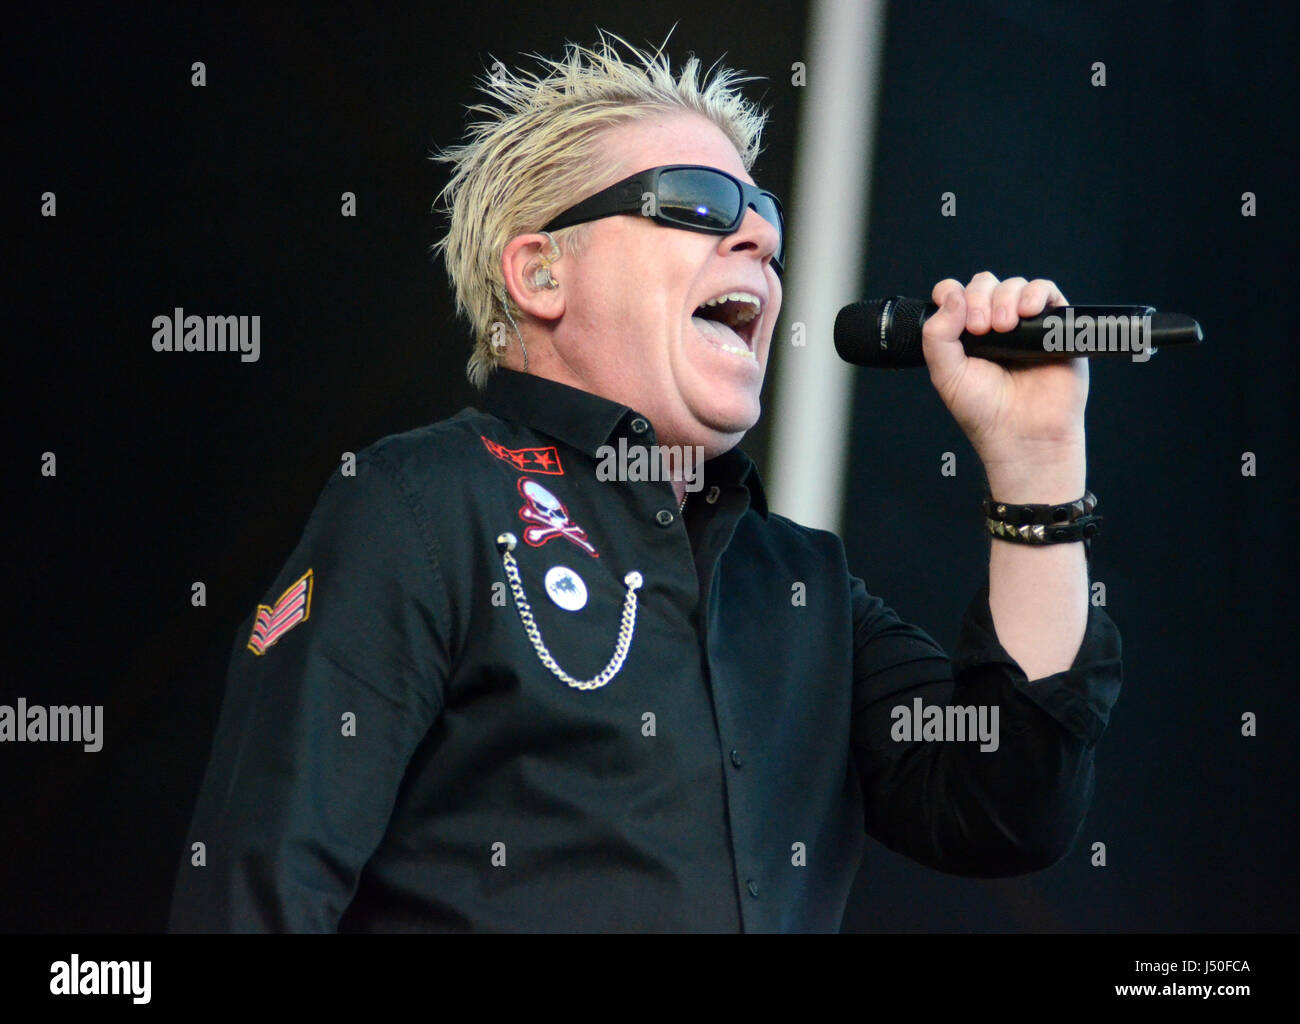 Somerset, Wisconsin, USA. 14th May, 2017. Lead singer Dexter Holland of The Offspring performs during the Northern Invasion Music Festival in Somerset, Wisconsin. Ricky Bassman/Cal Sport Media/Alamy Live News Stock Photo